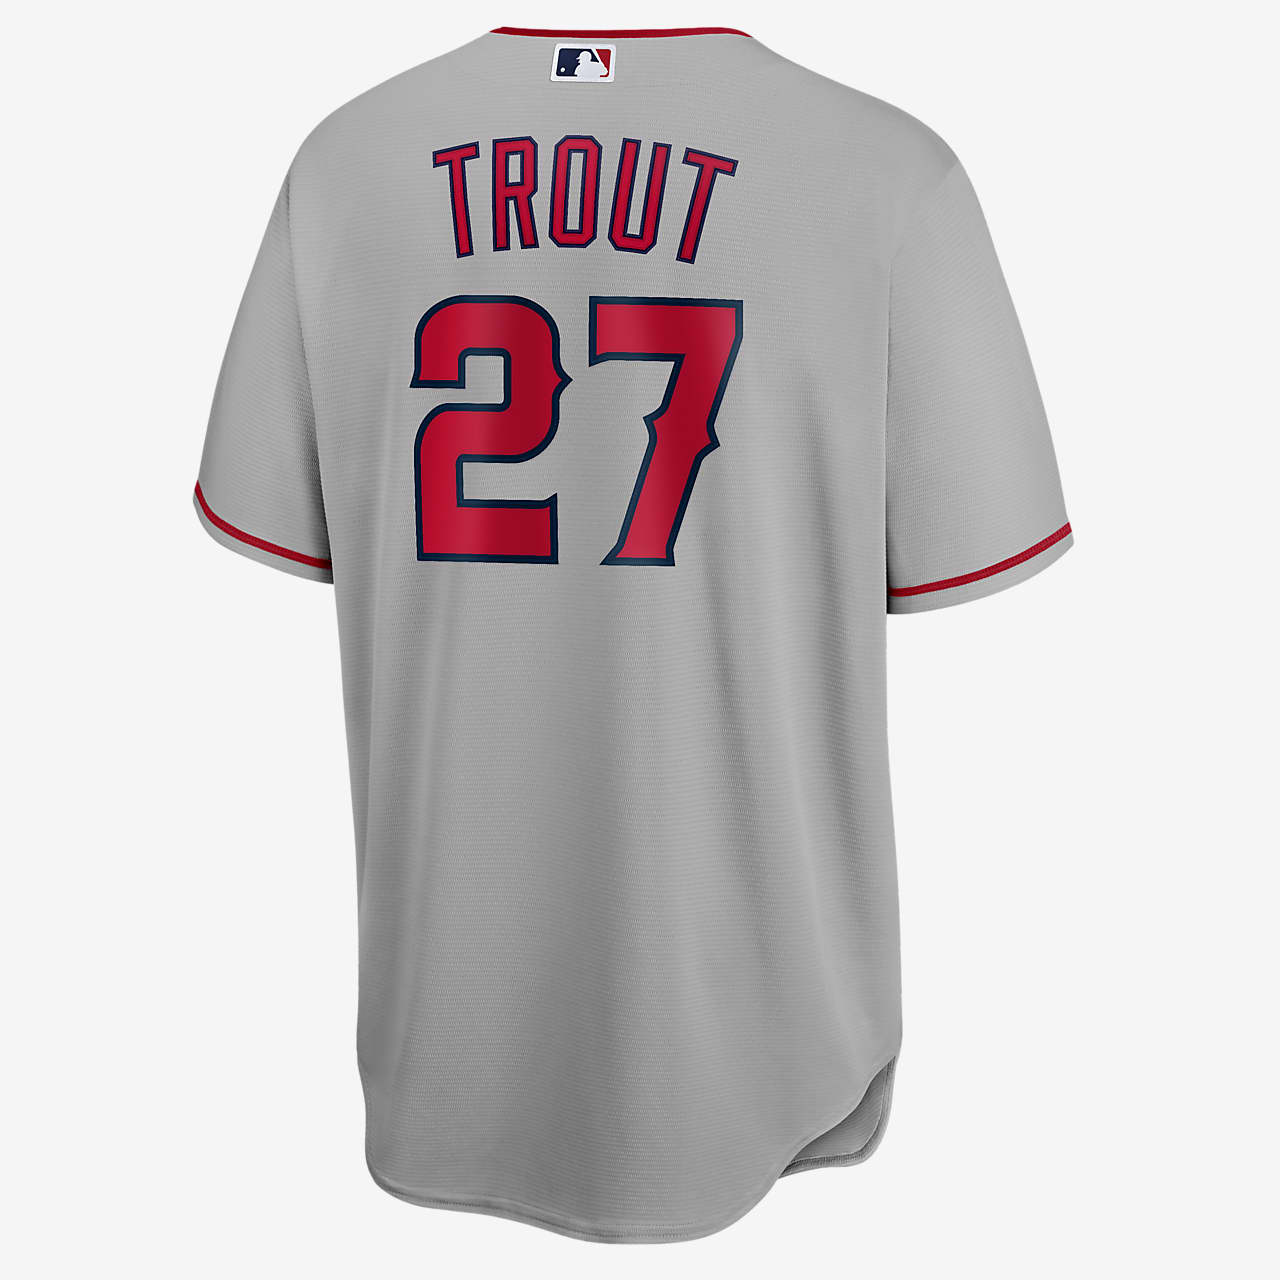 MLB Los Angeles Angels (Mike Trout) Men's Replica Baseball Jersey. Nike.com